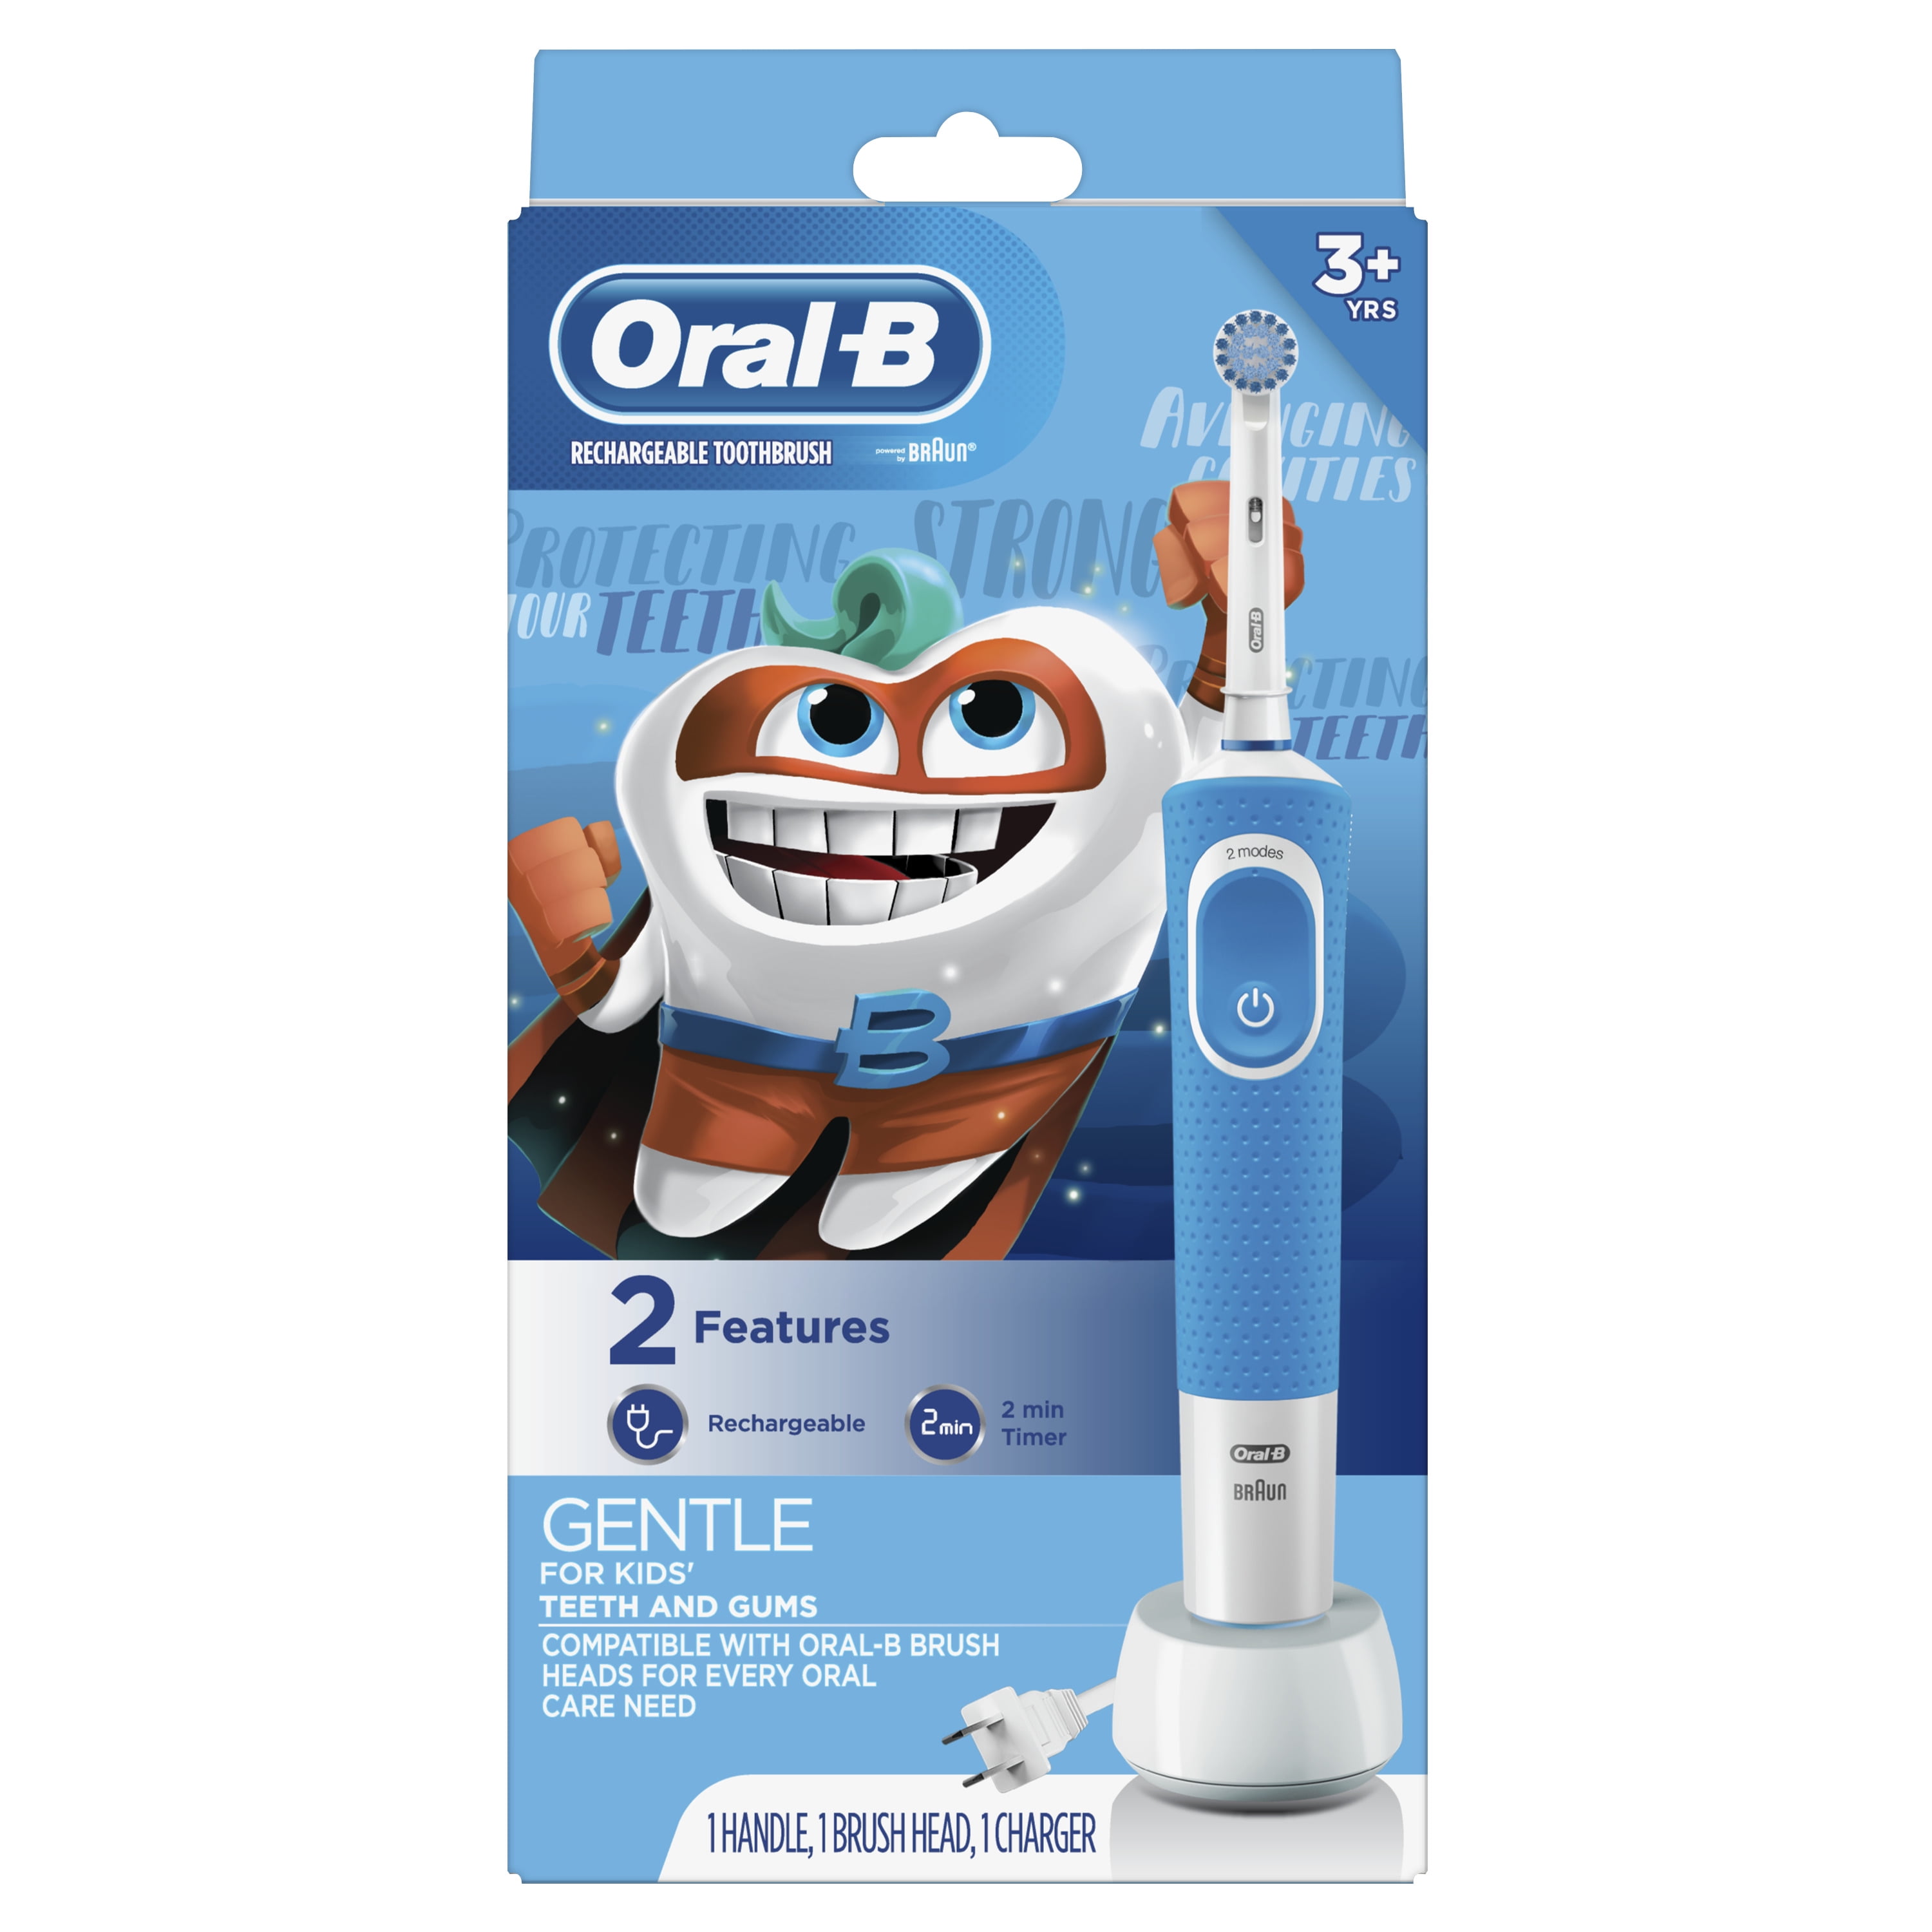 Oral-B Kids Electric Toothbrush with Sensitive Brush and Timer, Powered Braun, for Kids 3+ - Walmart.com